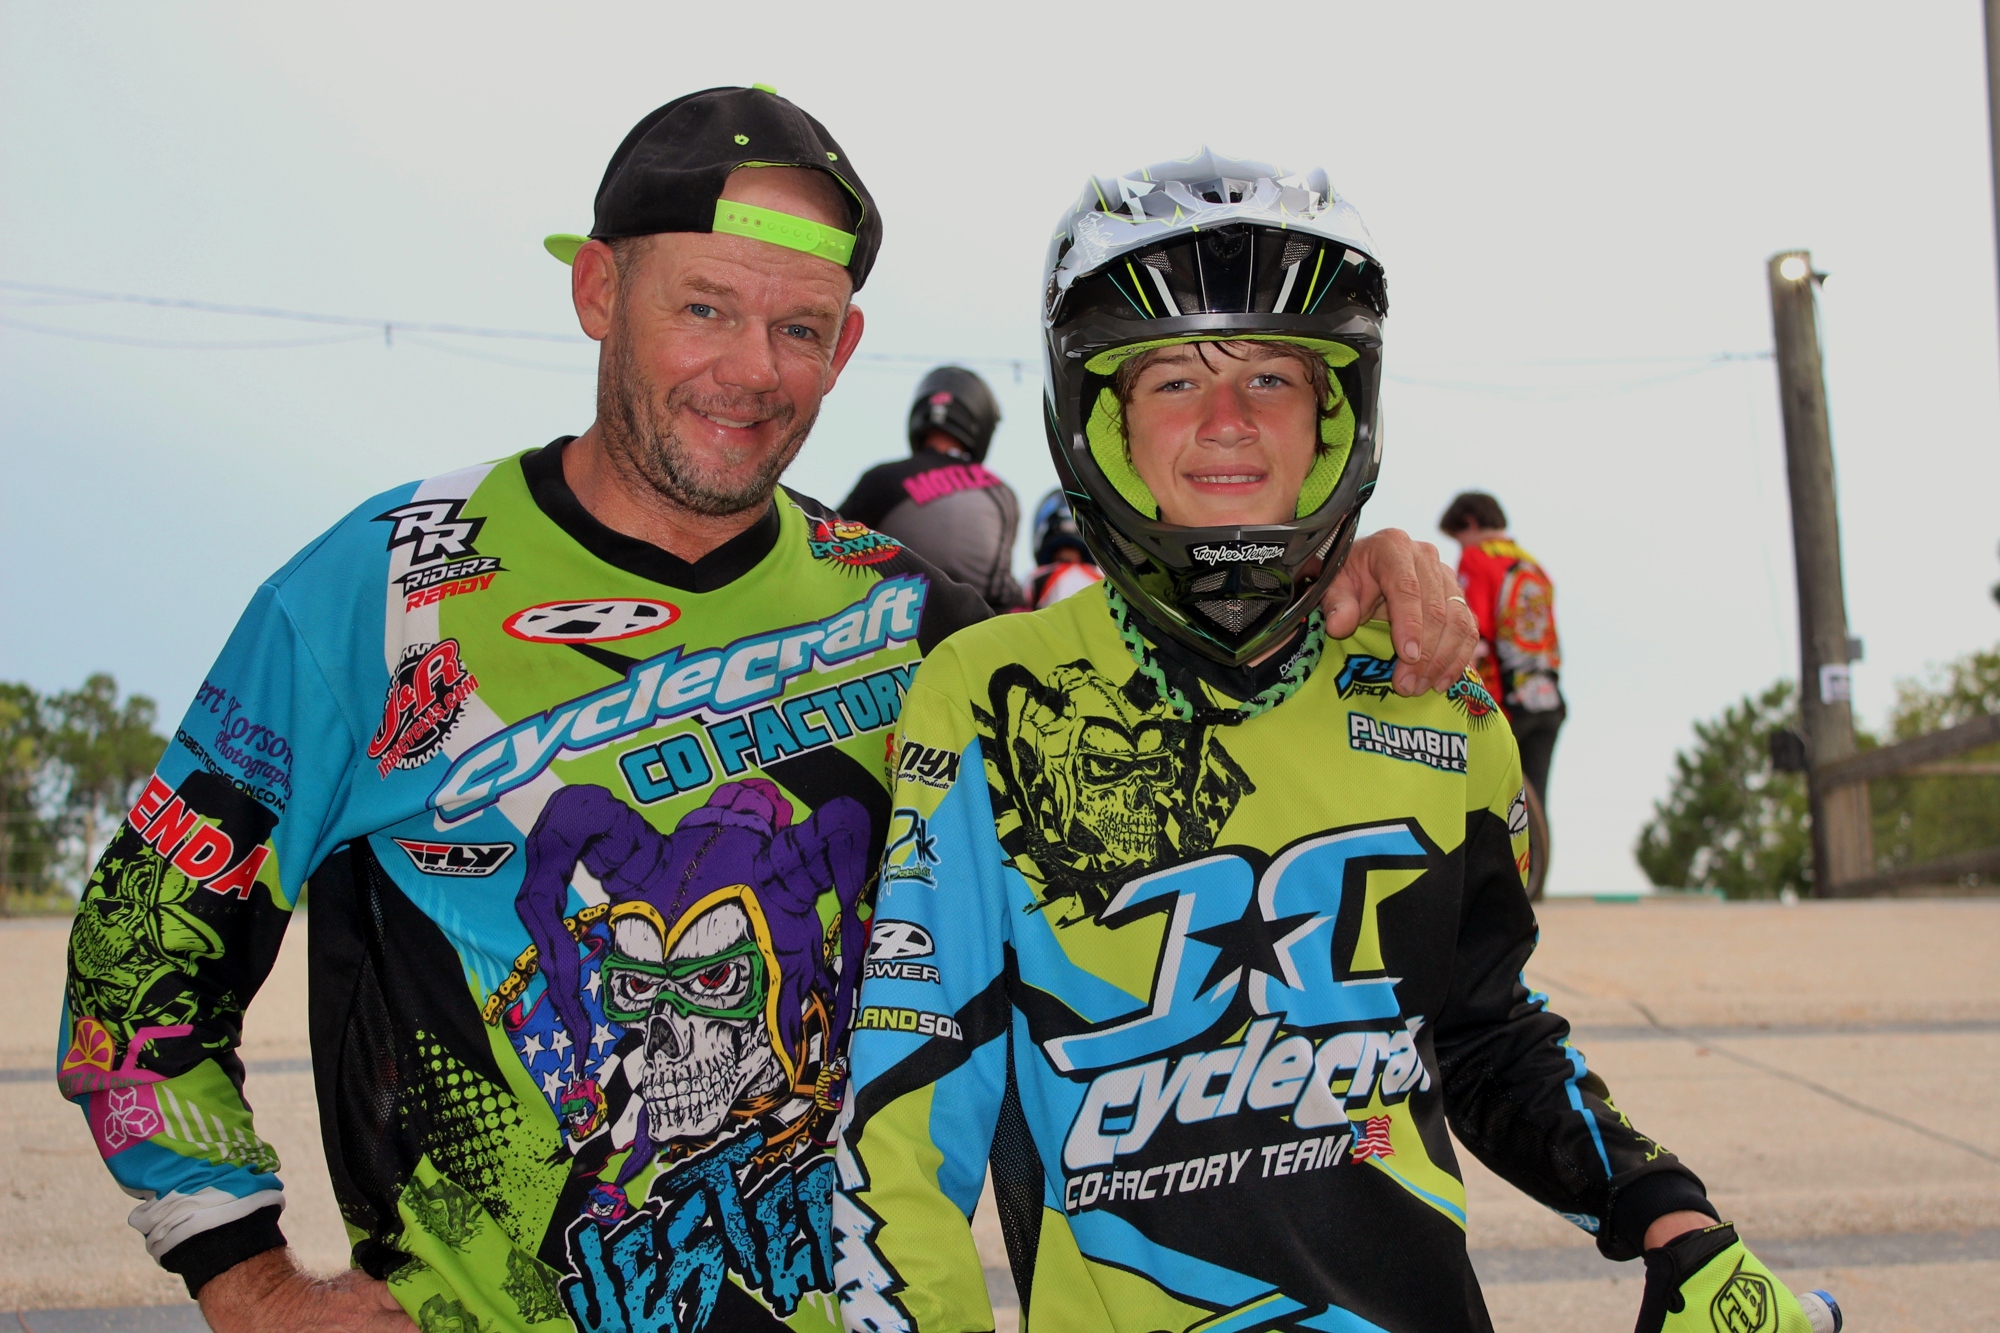 Lorne Leeman passed his BMX talents on to his son, Casey, who currently is first in the state in his division.